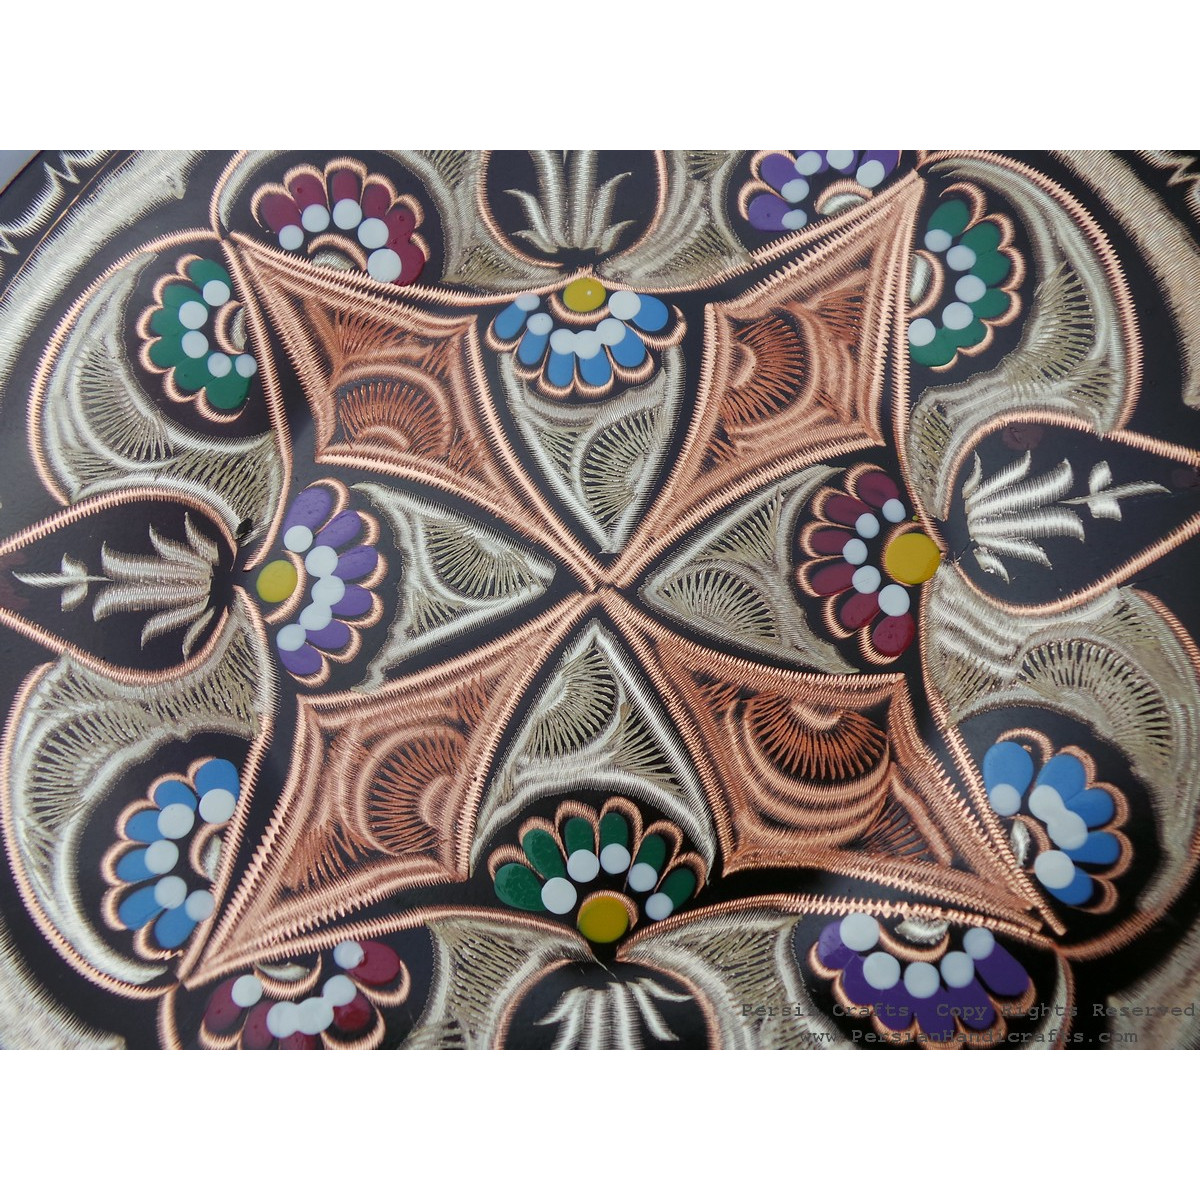 Enameled/Engraved Wall Hanging Plate - HE1026-Persian Handicrafts